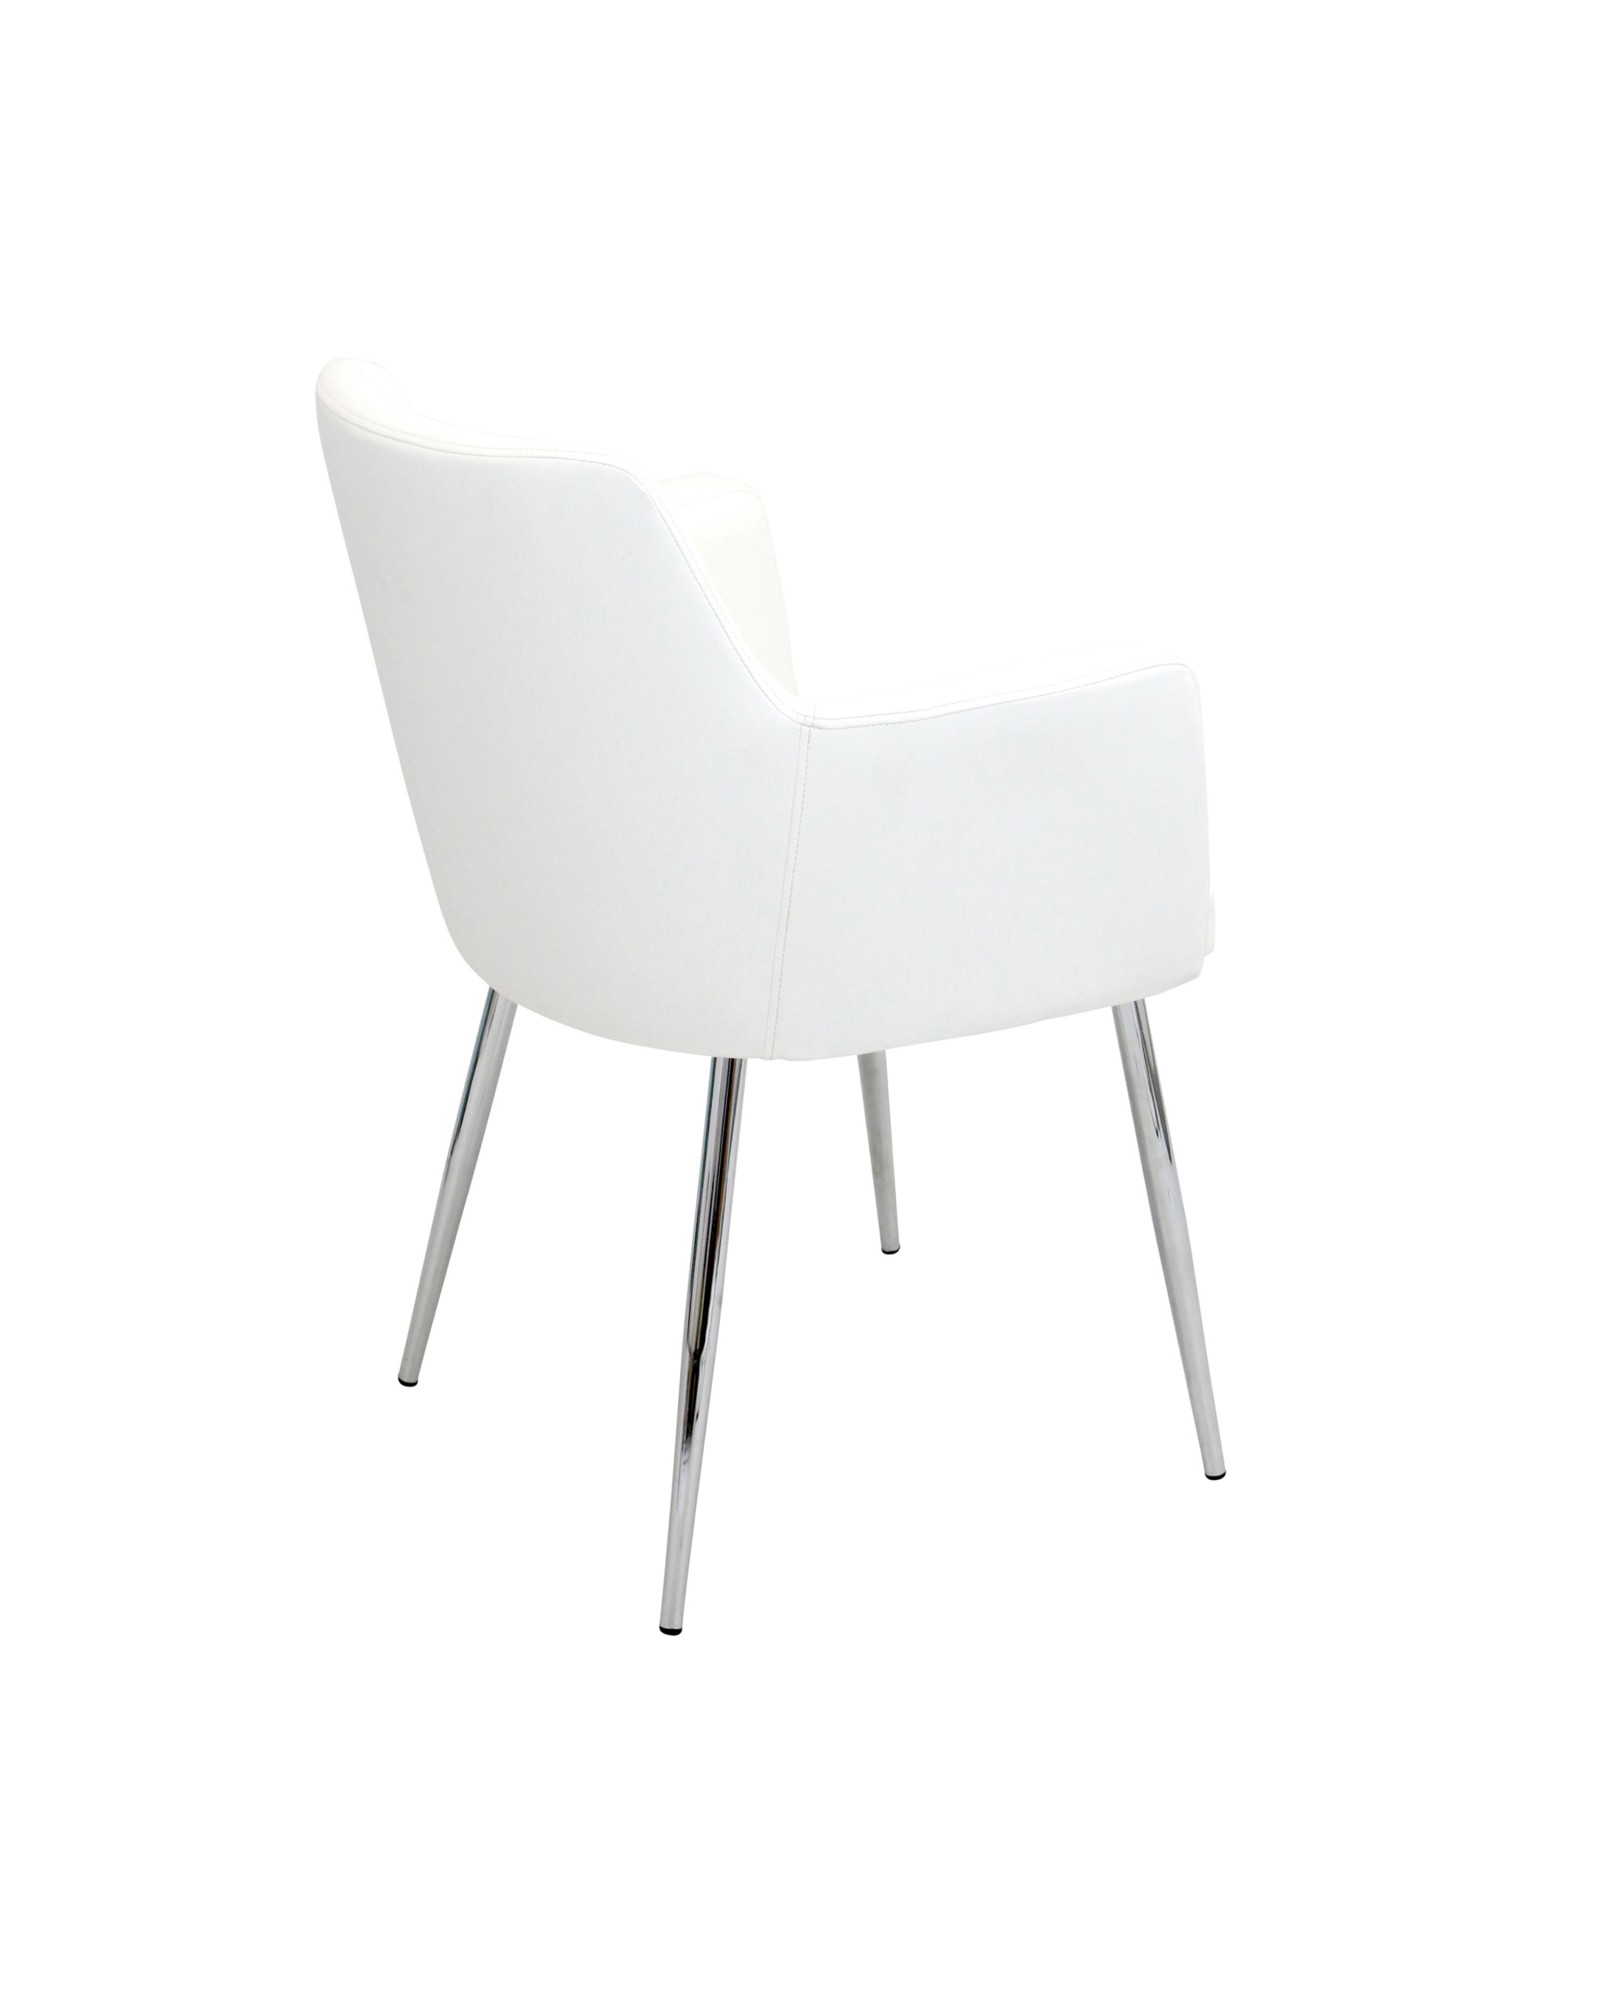 Andrew Contemporary Dining/Accent Chair in Chrome and White Faux Leather - Set of 2